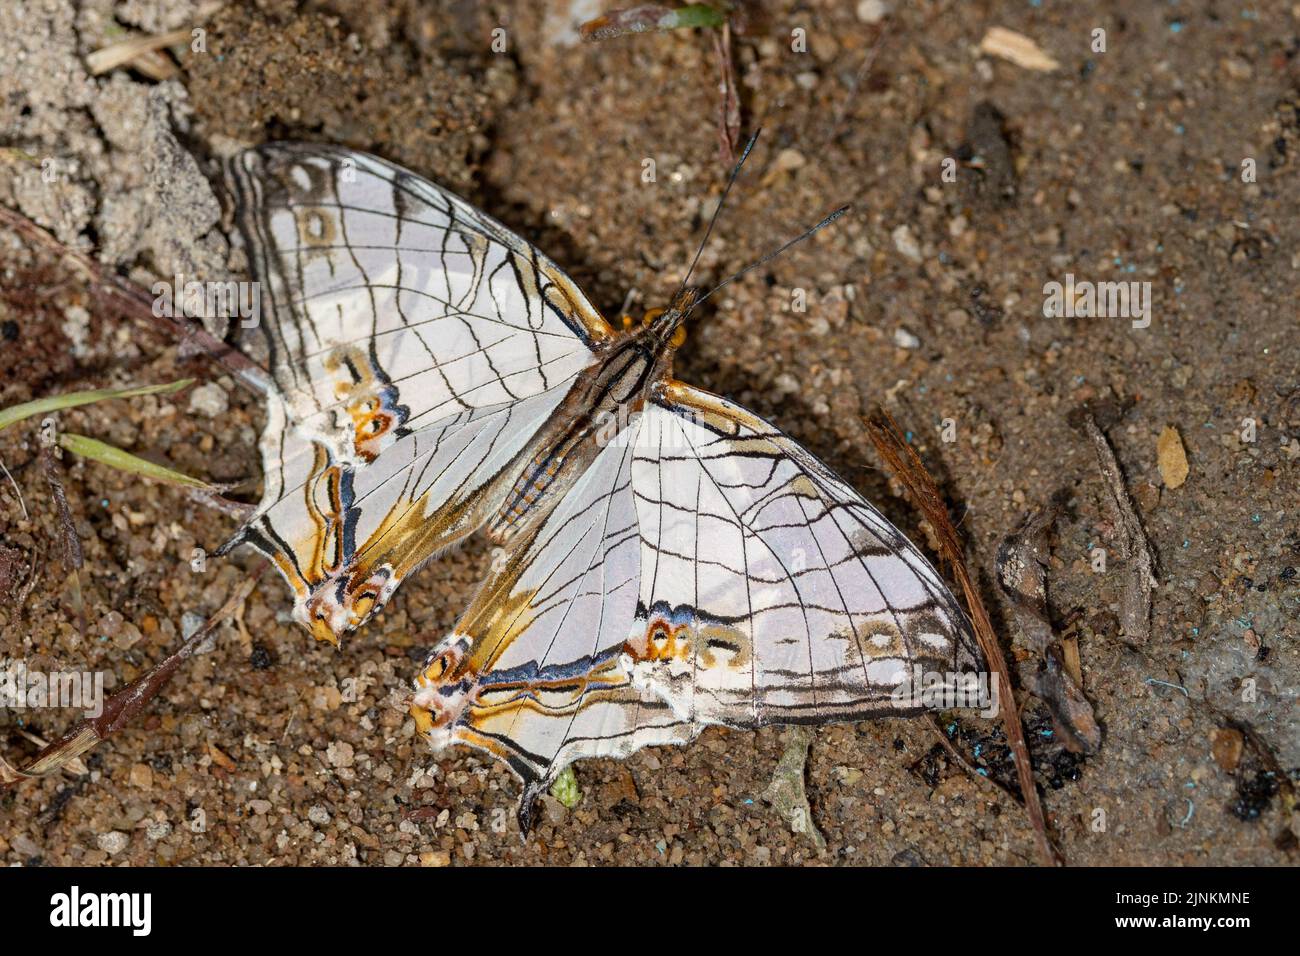 Common Map butterfly ( Cyrestis thyodamas) drinking water on wet soil, Thailand Stock Photo